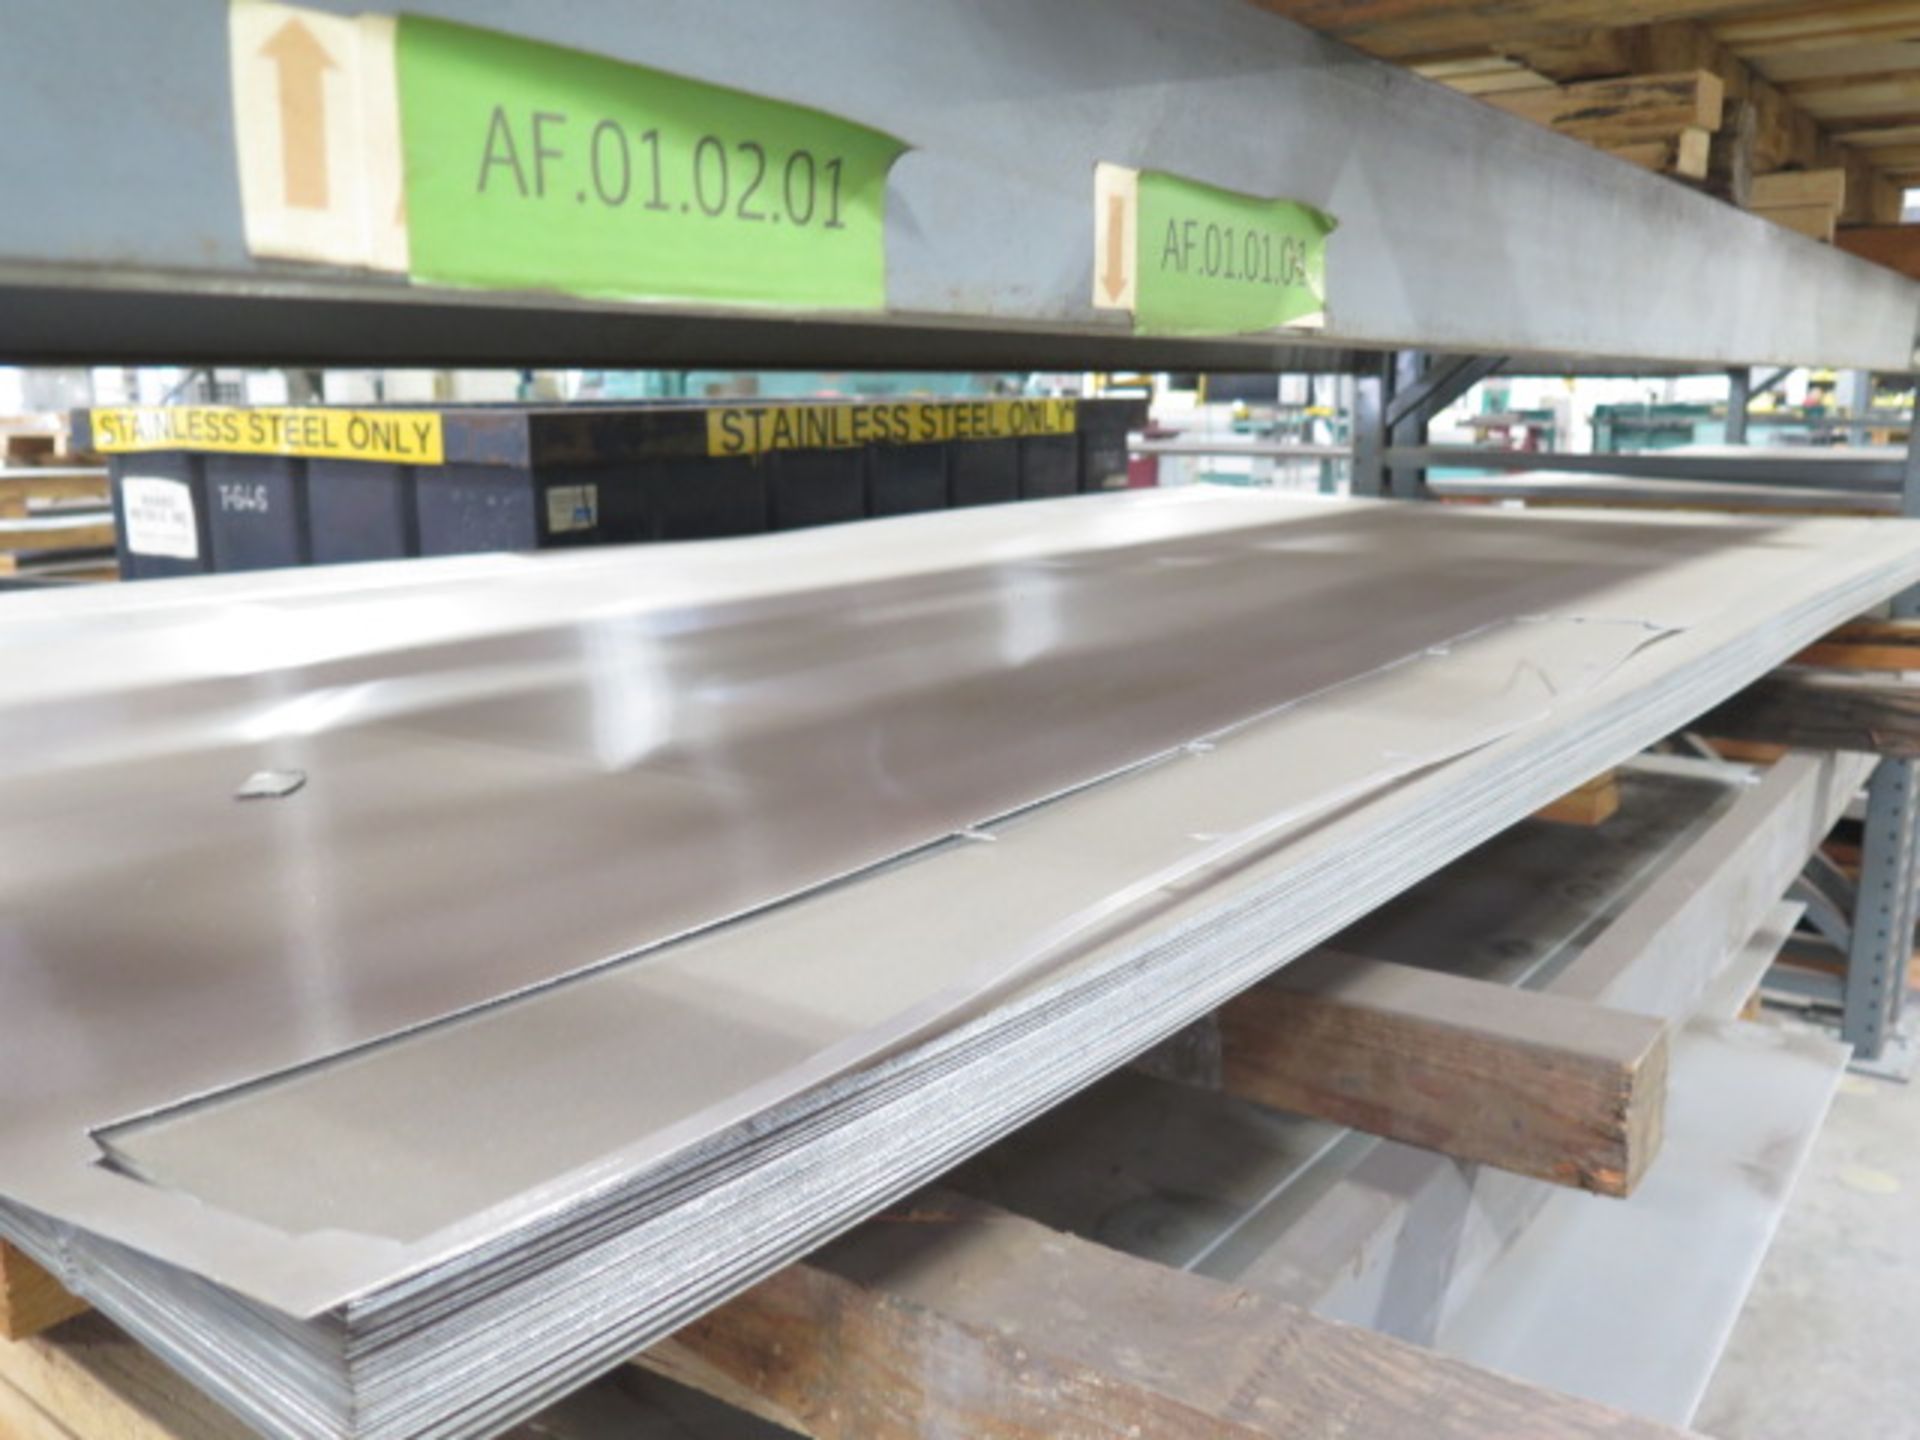 Large Quantity of Beaded Galvanized Sheet Stock anmd Steel Sheet Stock (SOLD AS-IS - NO WARRANTY) - Image 3 of 19